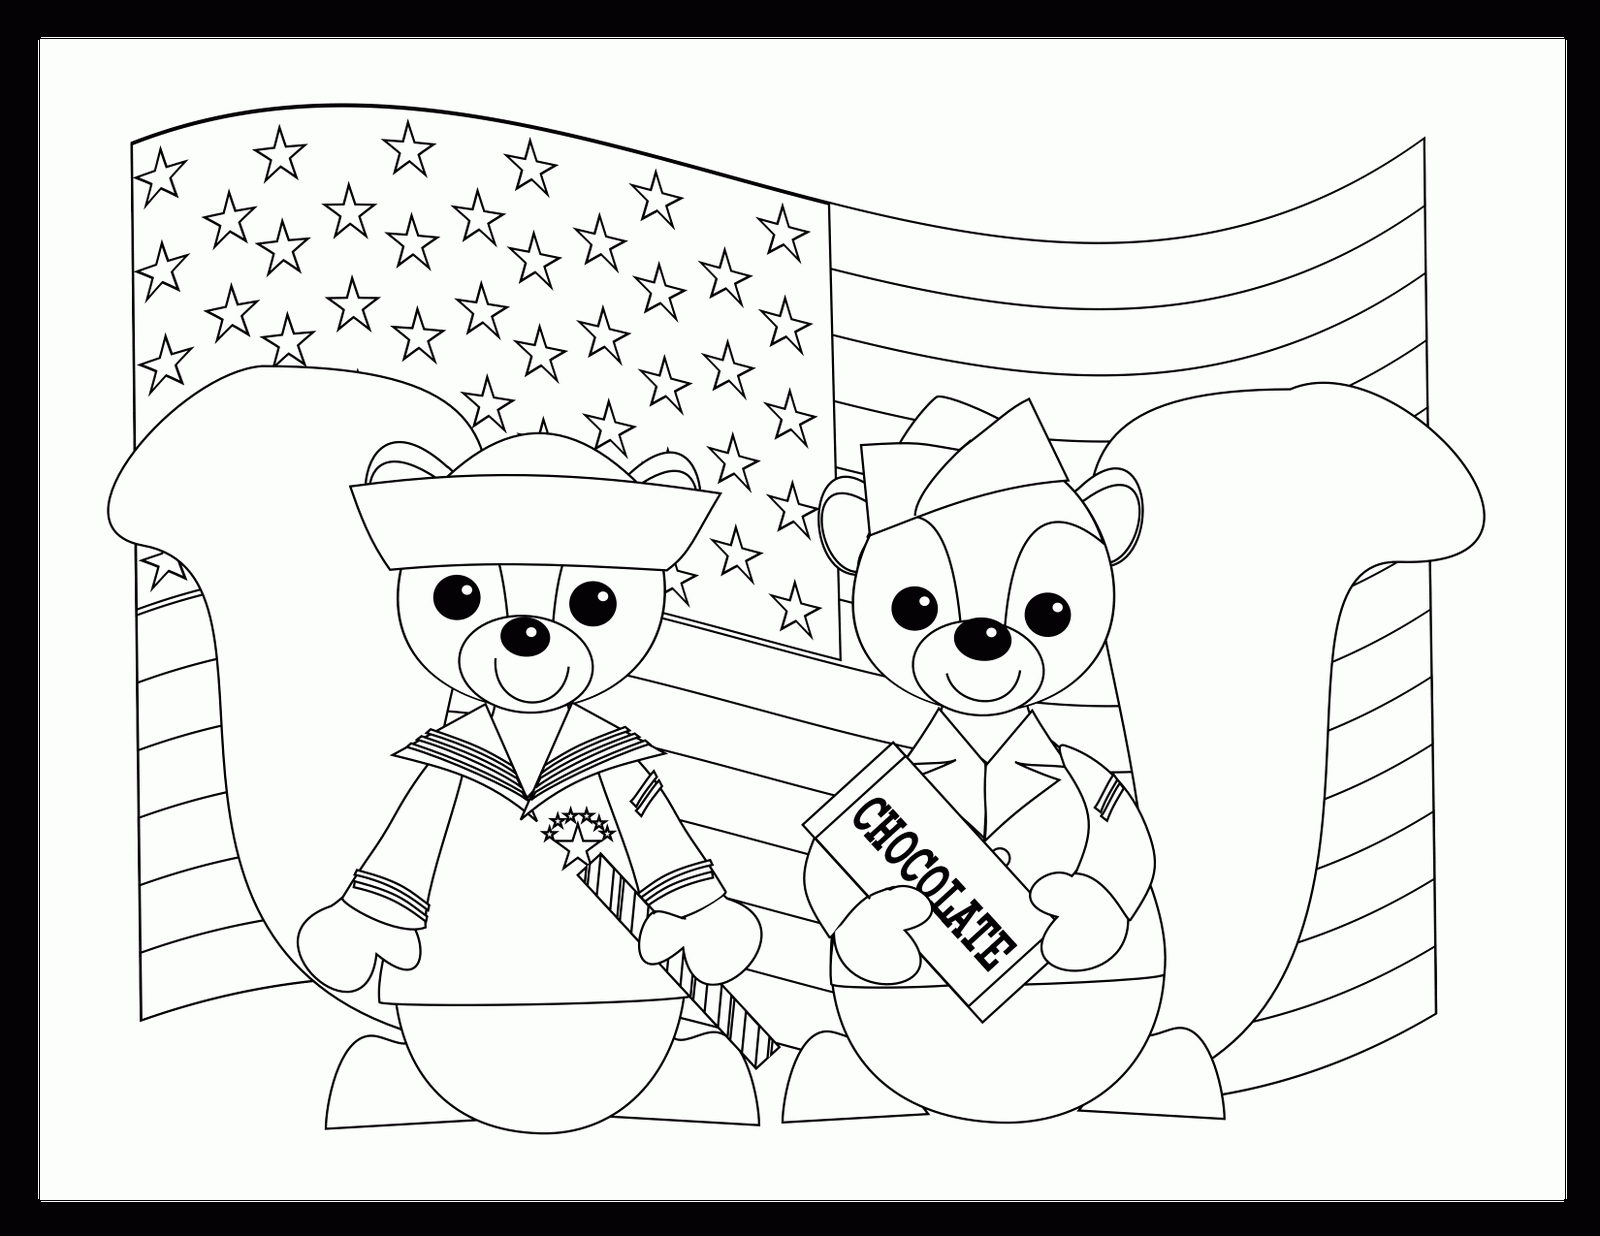 Veterans Day Coloring Pages Free Coloring Home